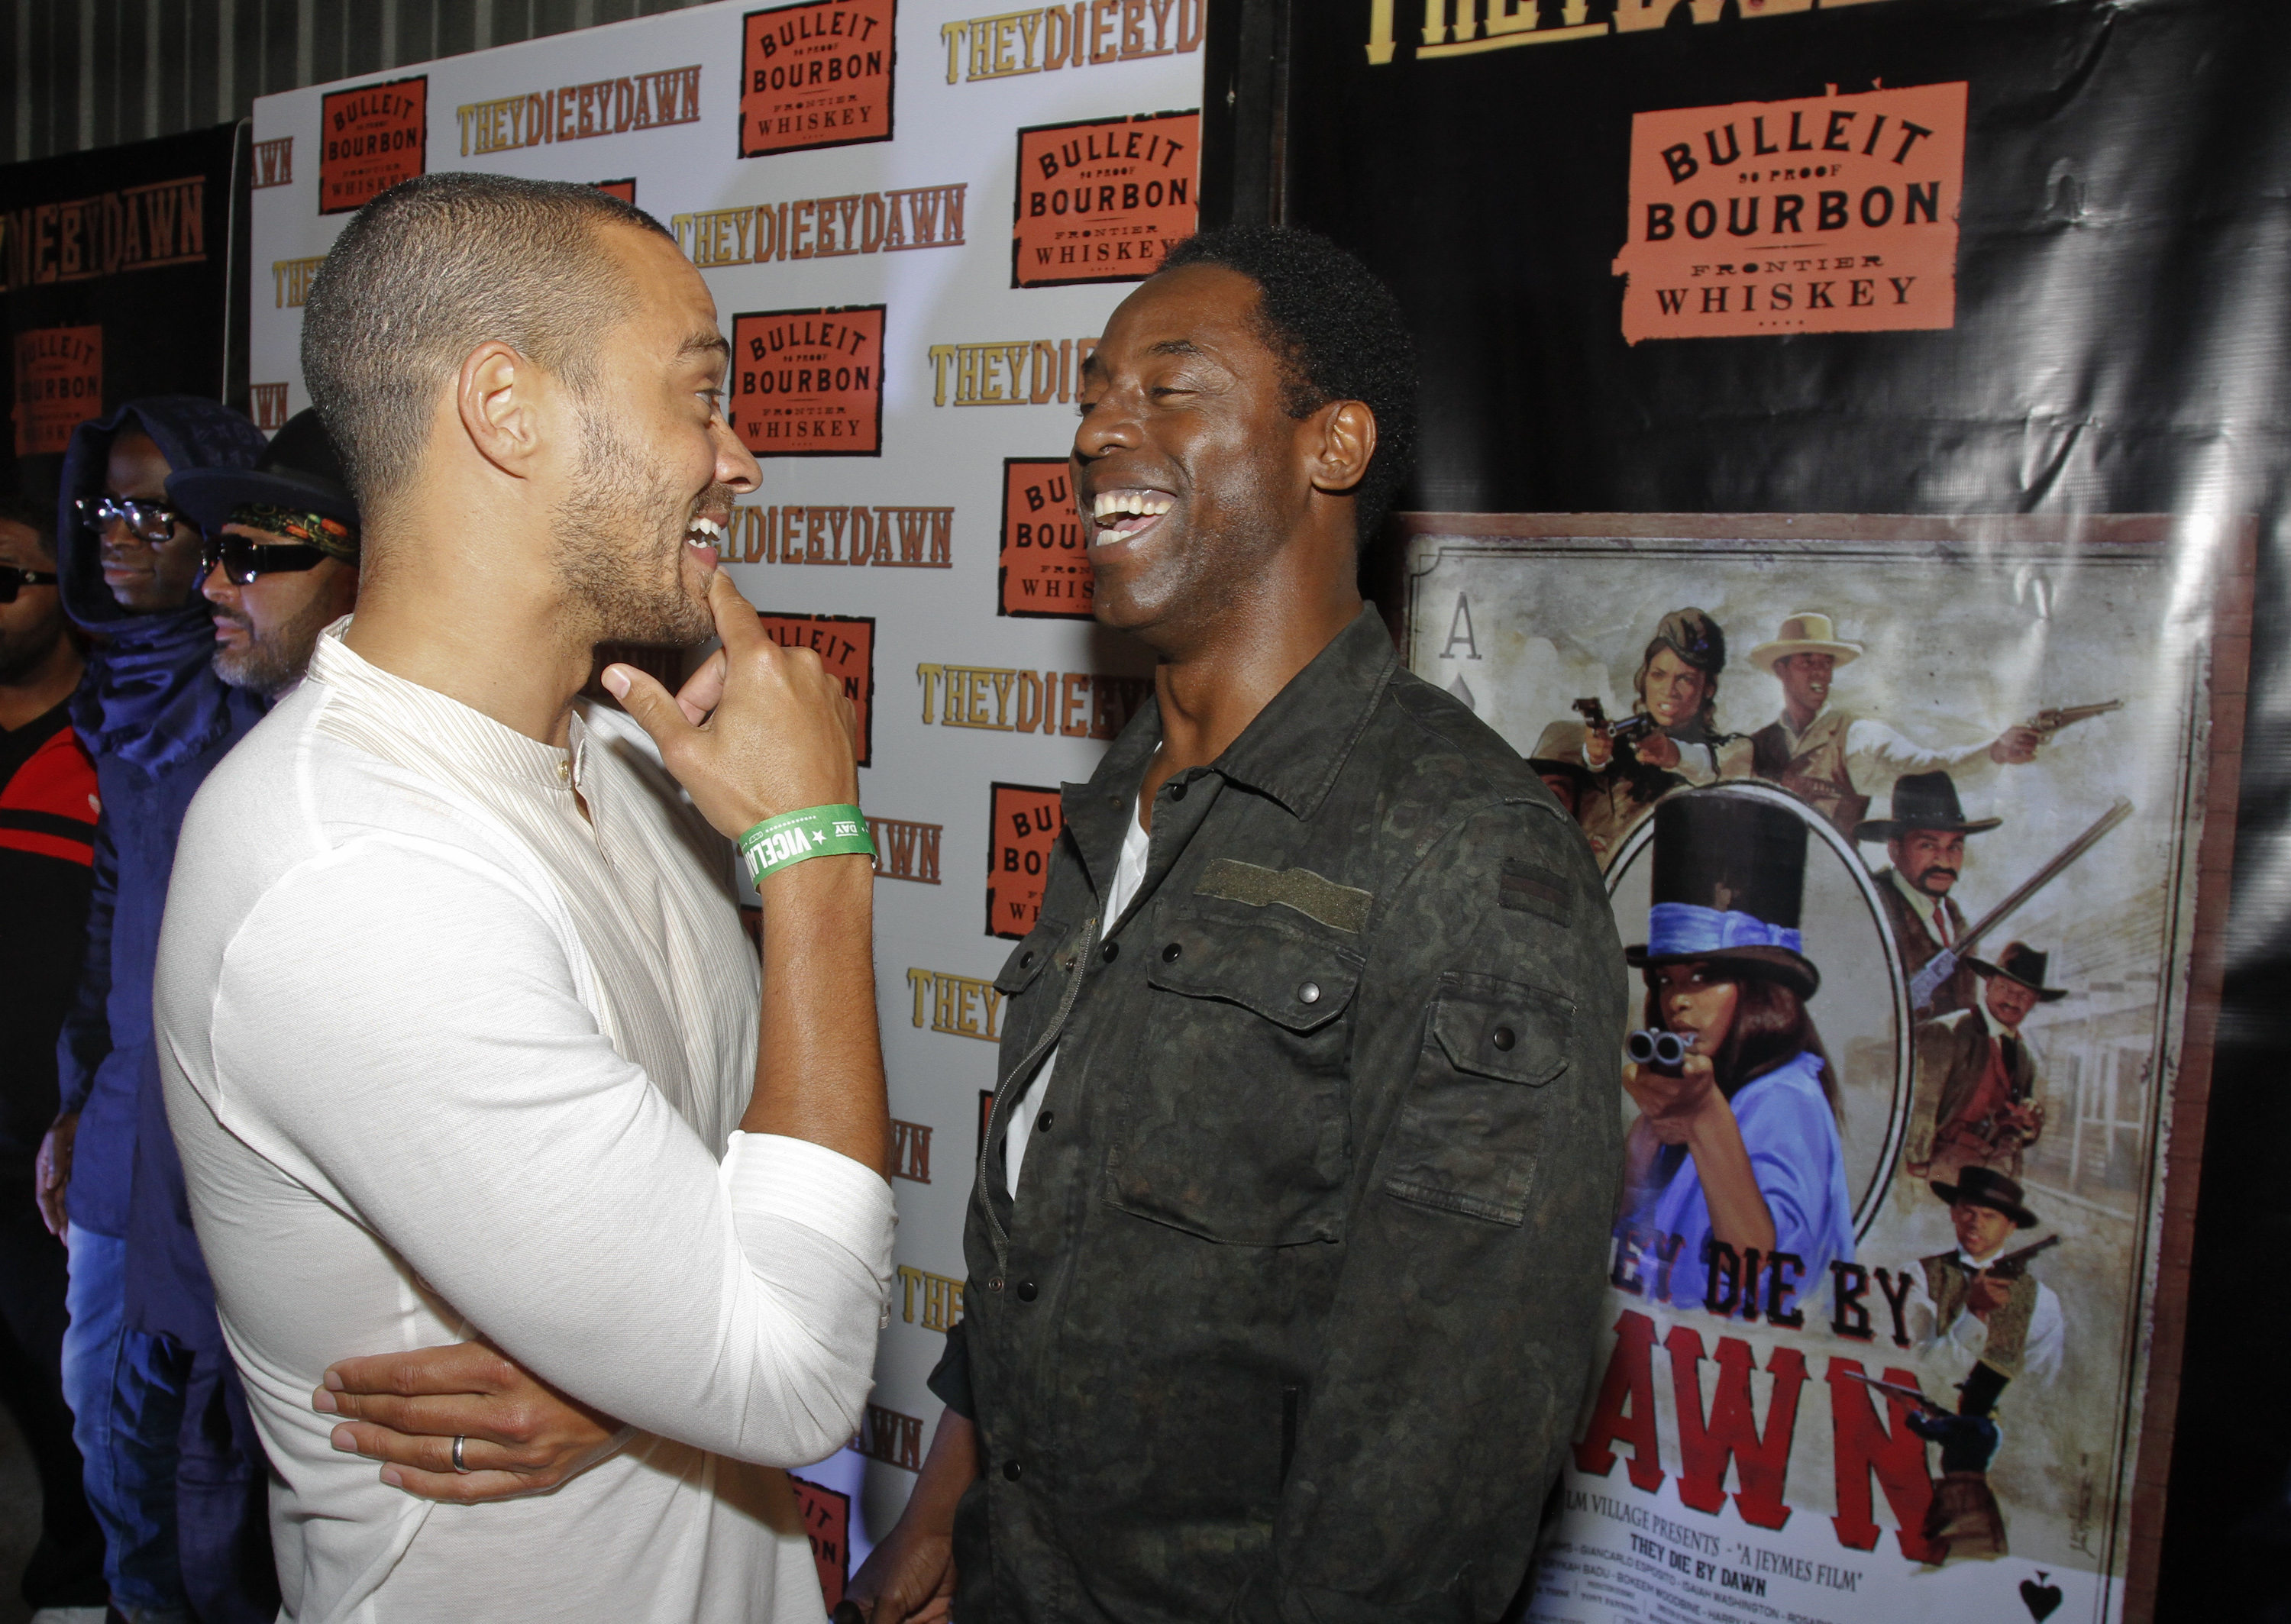 Jesse Williams, left, and Isaiah Washington share a laugh on the red carpet at the Bulleit Bourbon presents "They Die By Dawn" premiere at SXSW on Saturday, March 16, 2013 in Austin, Texas. (Photo by Jack Plunkett/Bulleit Bourbon)